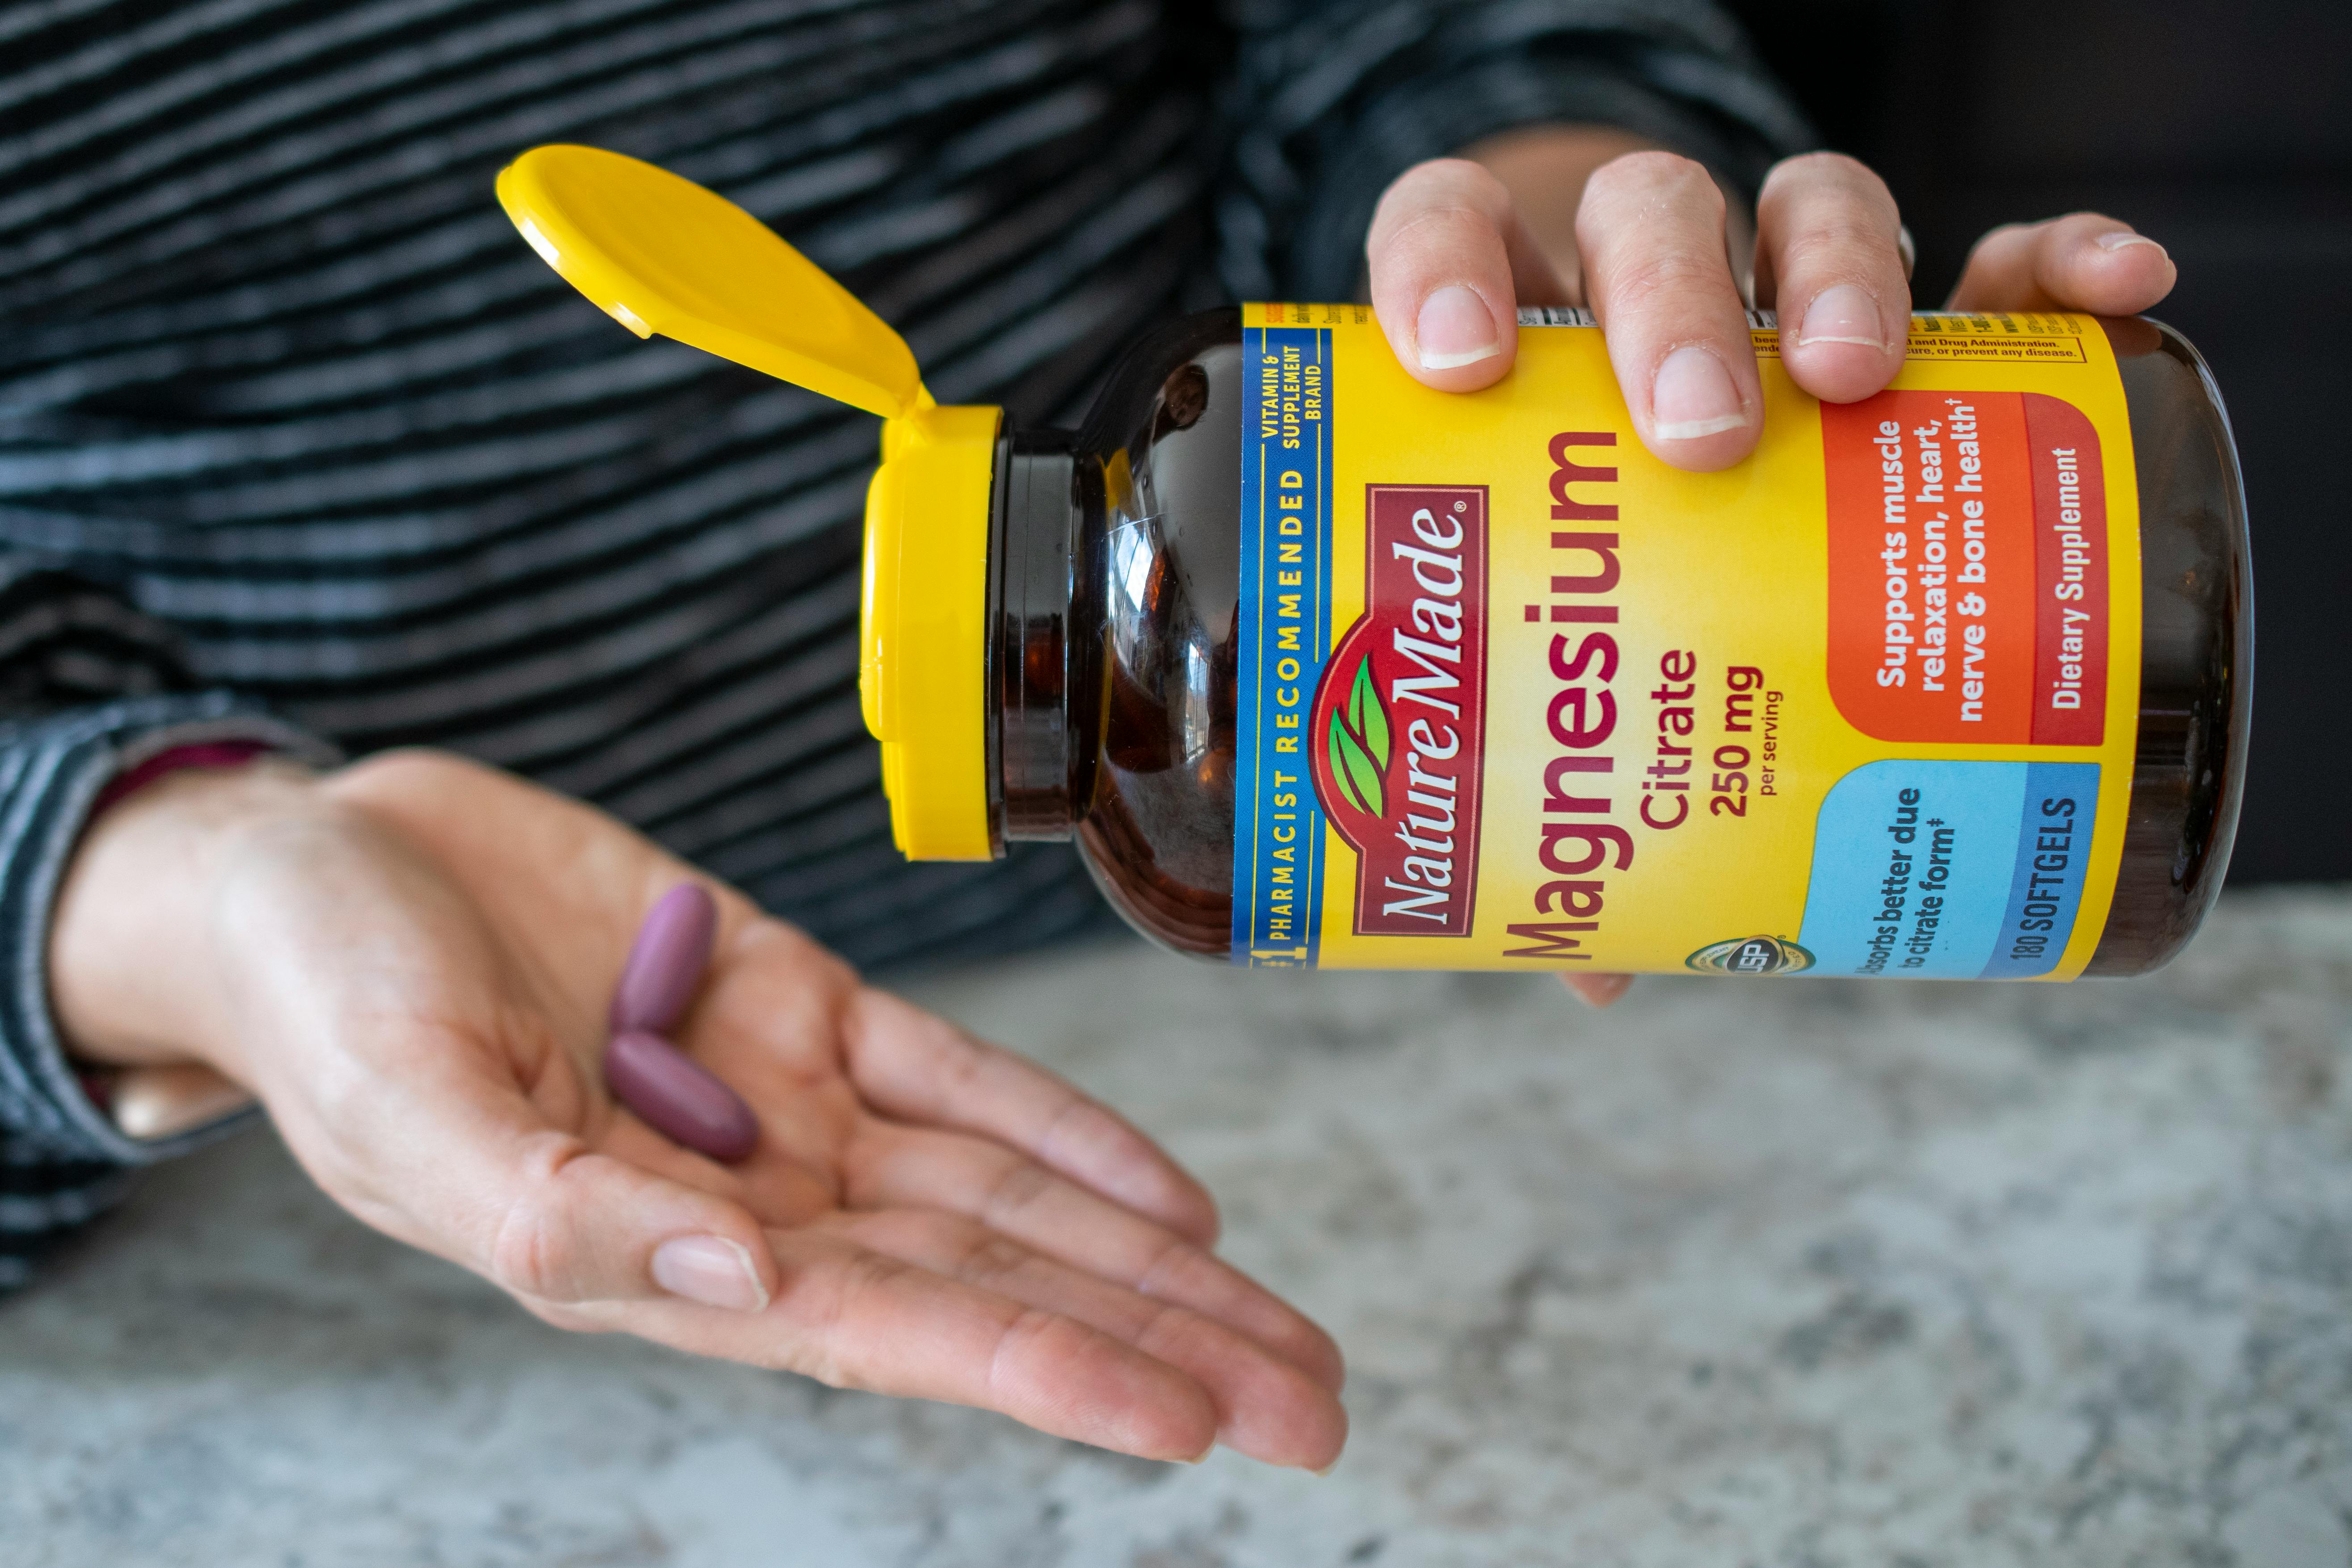 A person pouring two vitamins from a bottle into the palm of their hand